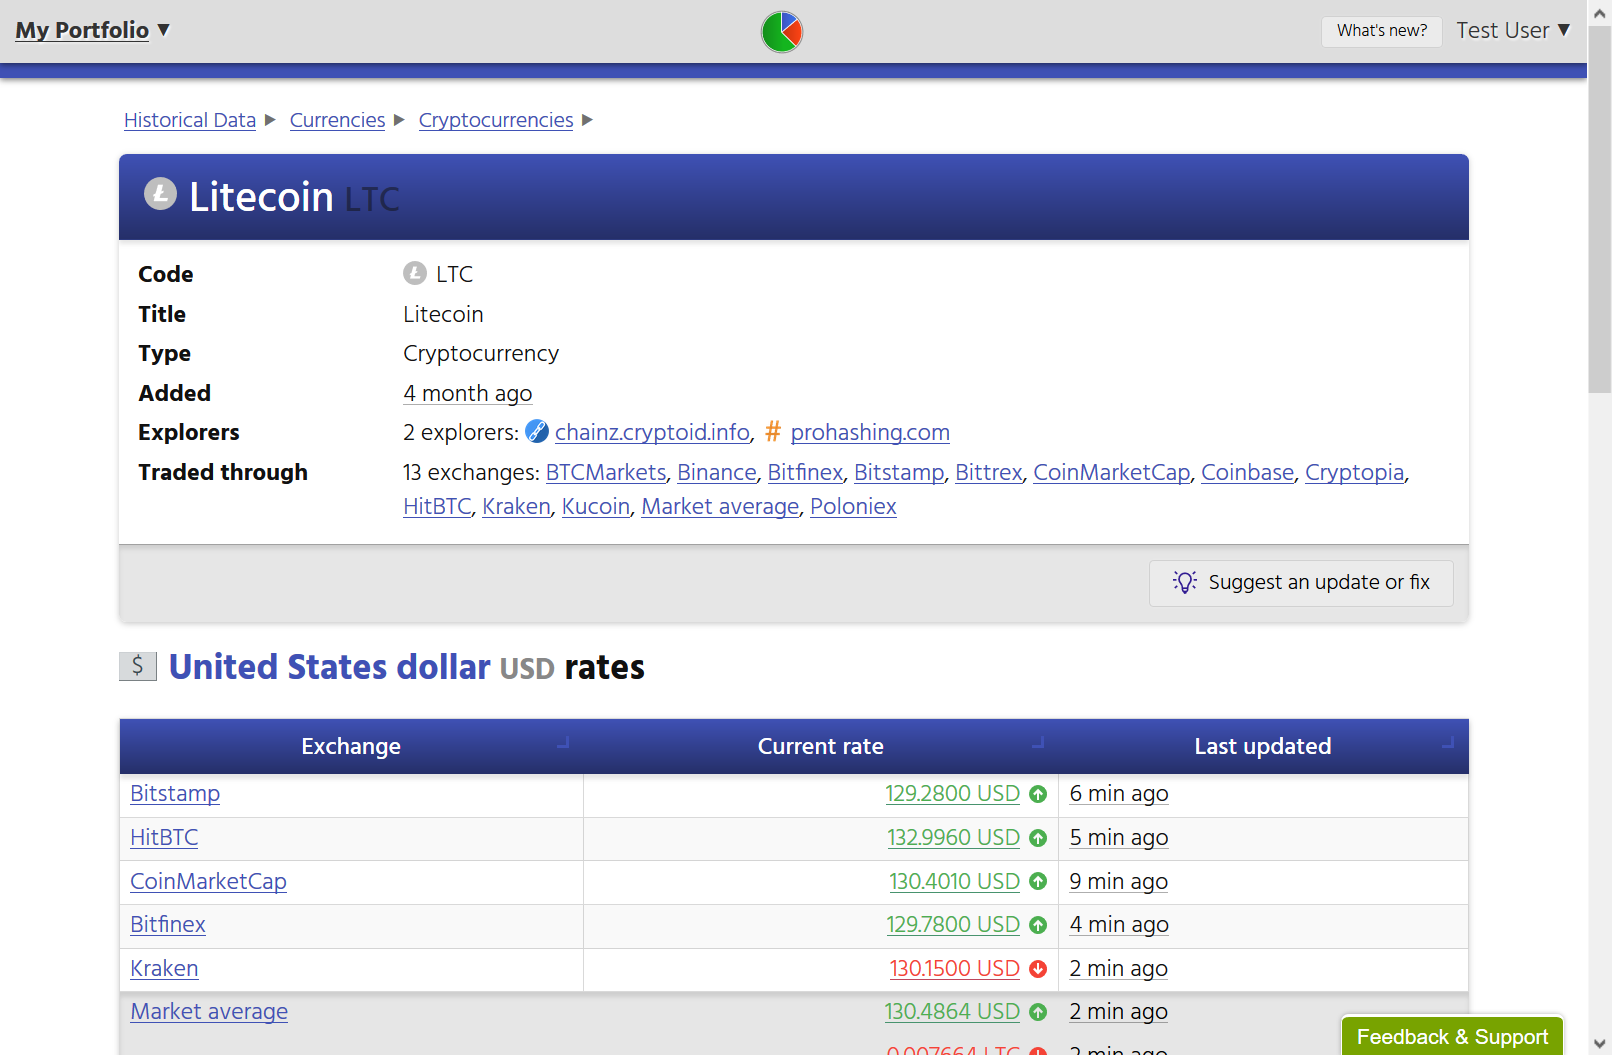 Screenshot showing technical information about Litecoin, including the explorers that can be used to browse Litecoin addresses; exchanges that trade in Litecoin; and current Litecoin/US Dollar rates.